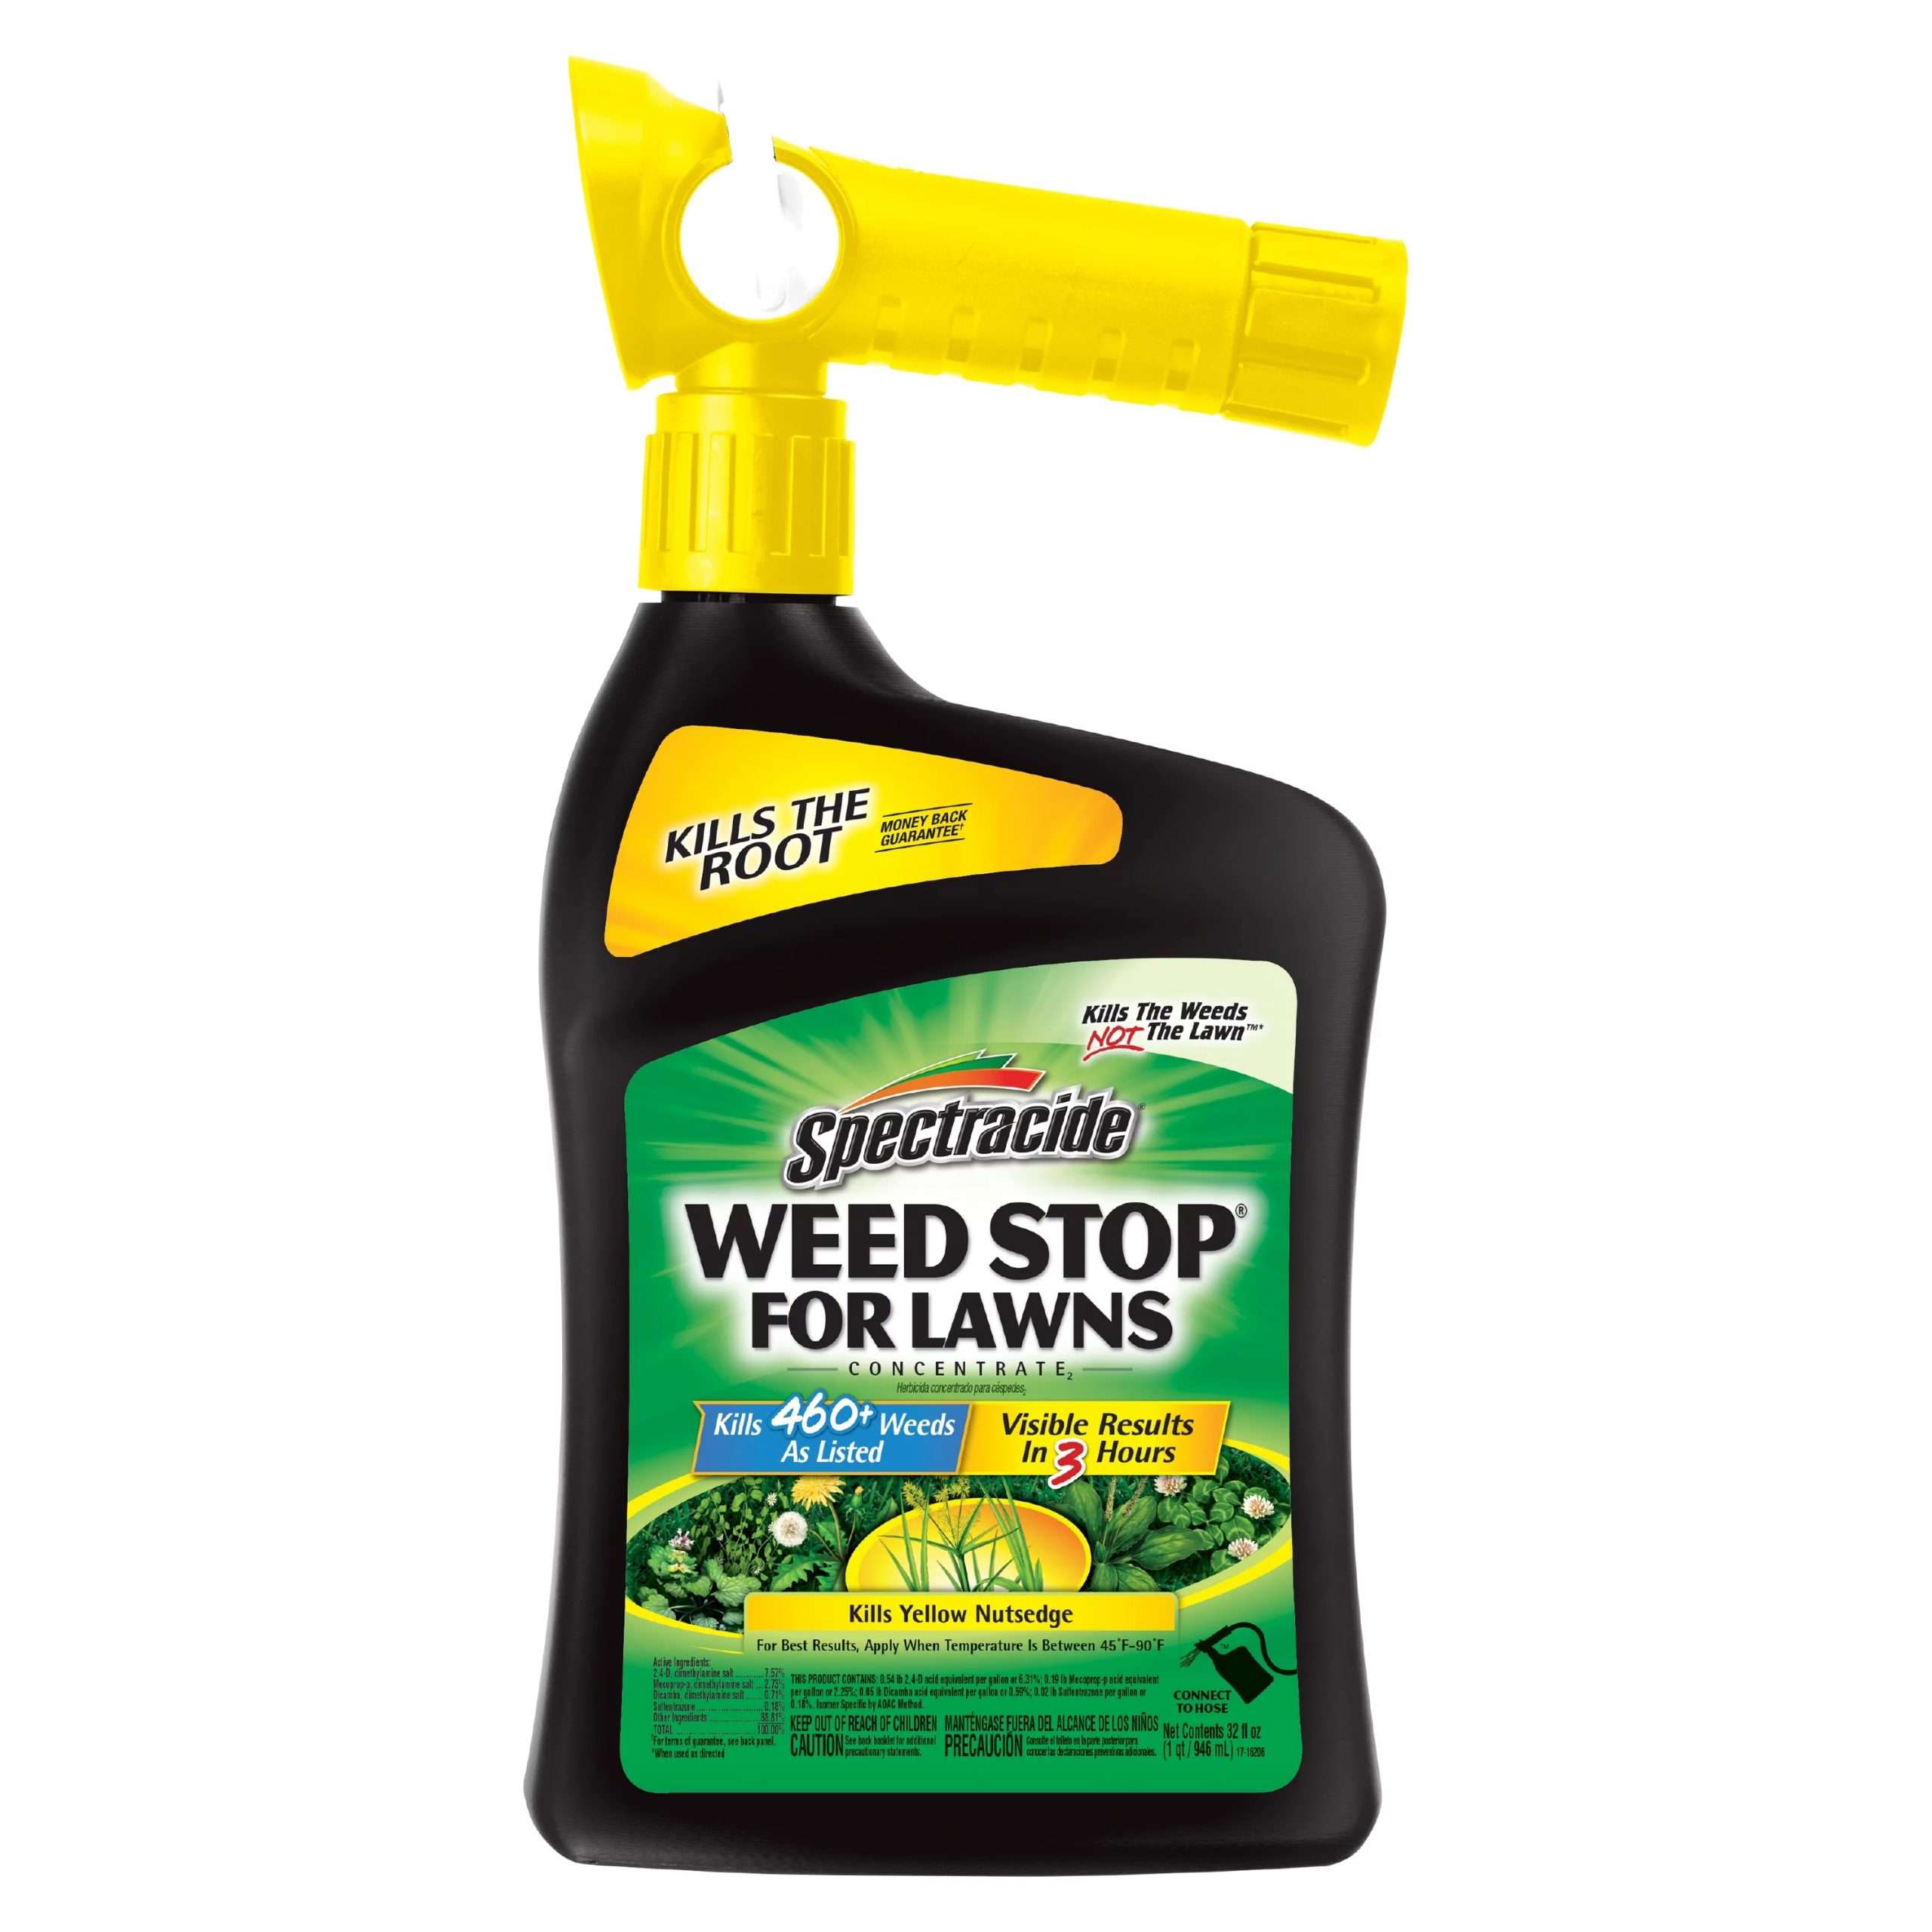 Spectracide Weed Stop for Lawns Concentrate, Weed Killer, 32oz ...